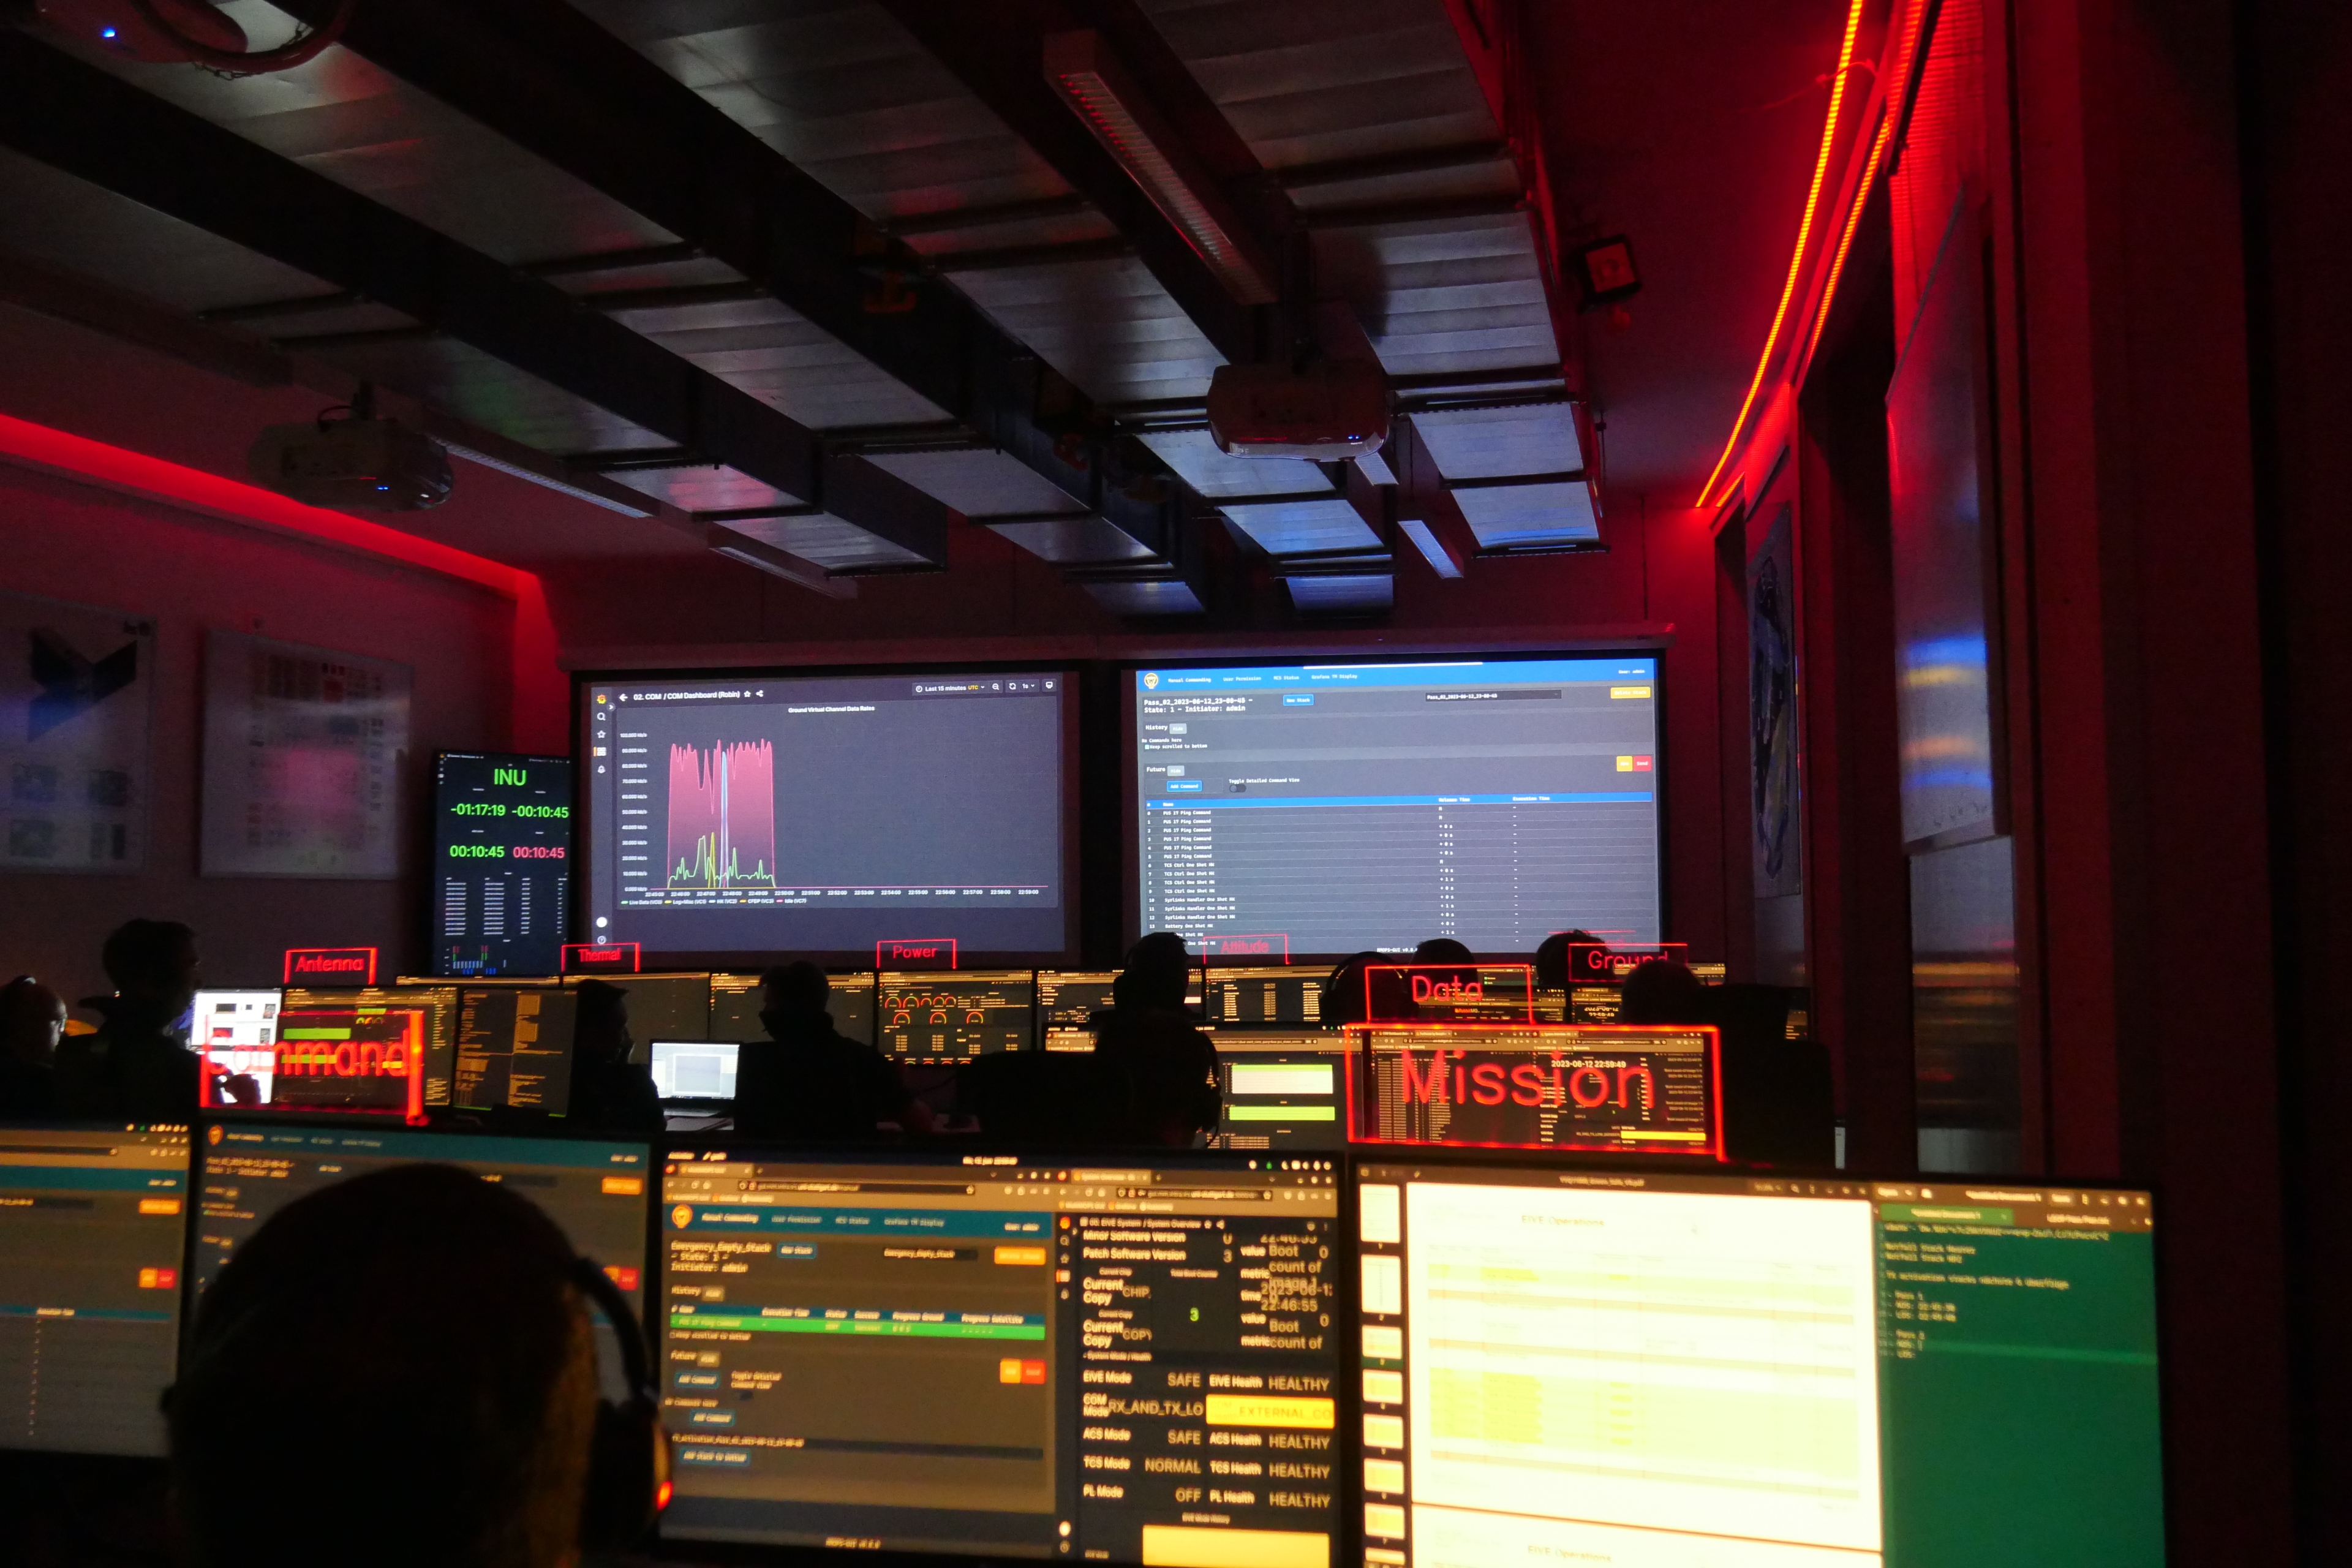 A control room for monitoring satellites. Two people are sitting in front of screens with their backs to the camera. The room is darkened and bathed in red light.